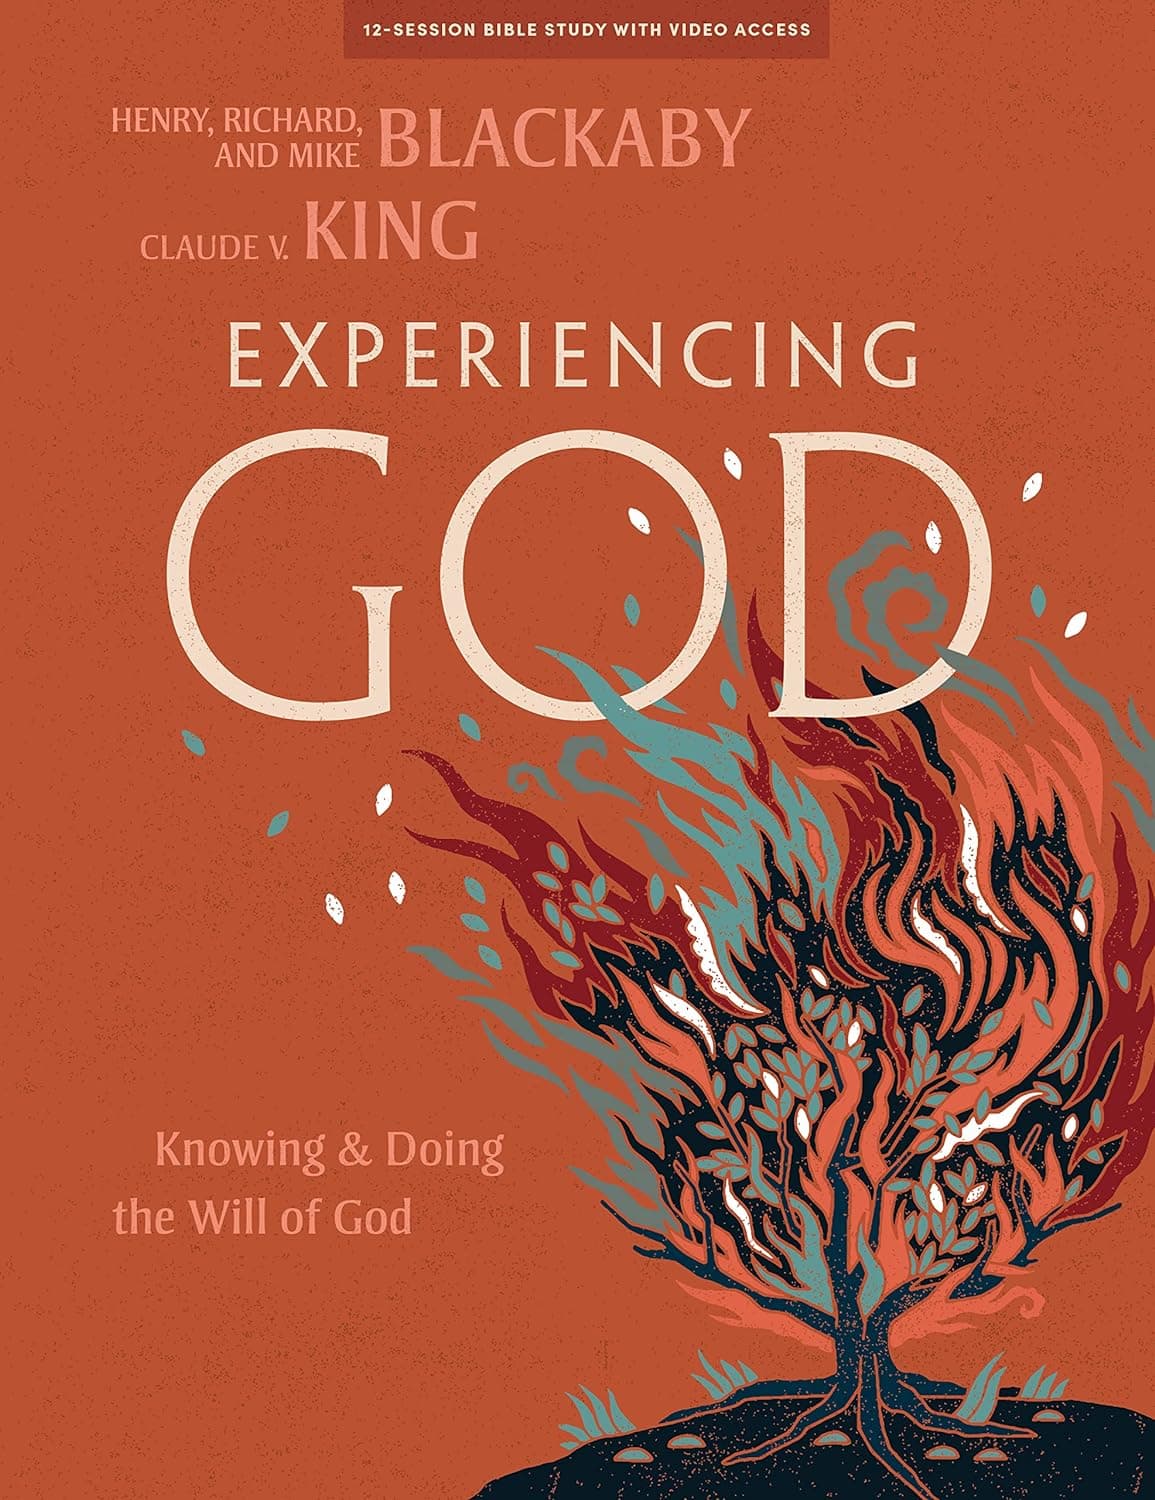 Experiencing God by Henry T. Blackaby, Richard Blackaby, Mike Blackaby and Claude V. King